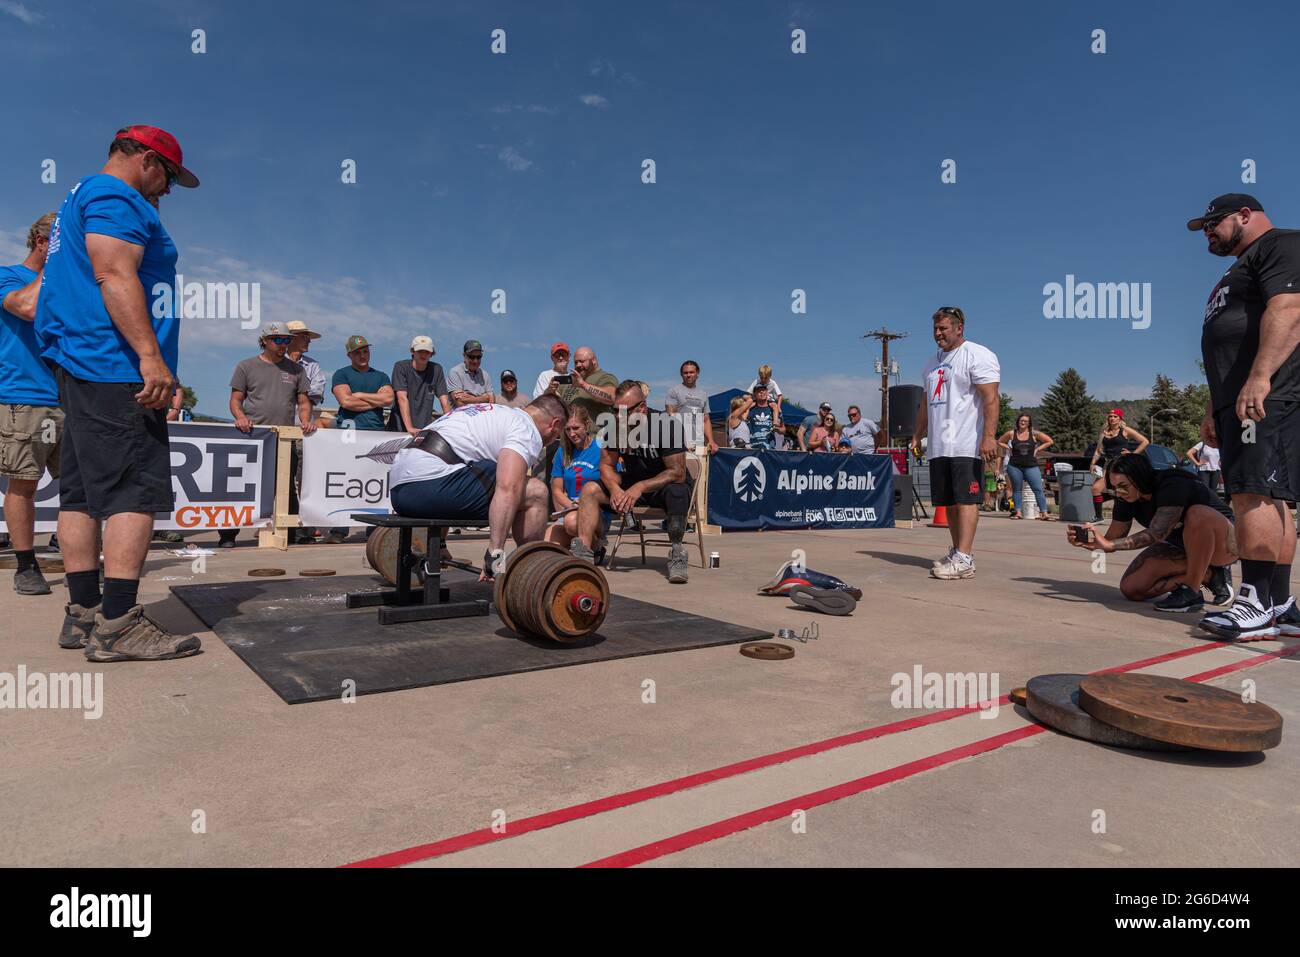 Athlete with disability surrounded by supporters, judges and spotters prepares to lift a loaded barbell in the Crown Mountain Strongman Championship . Stock Photo